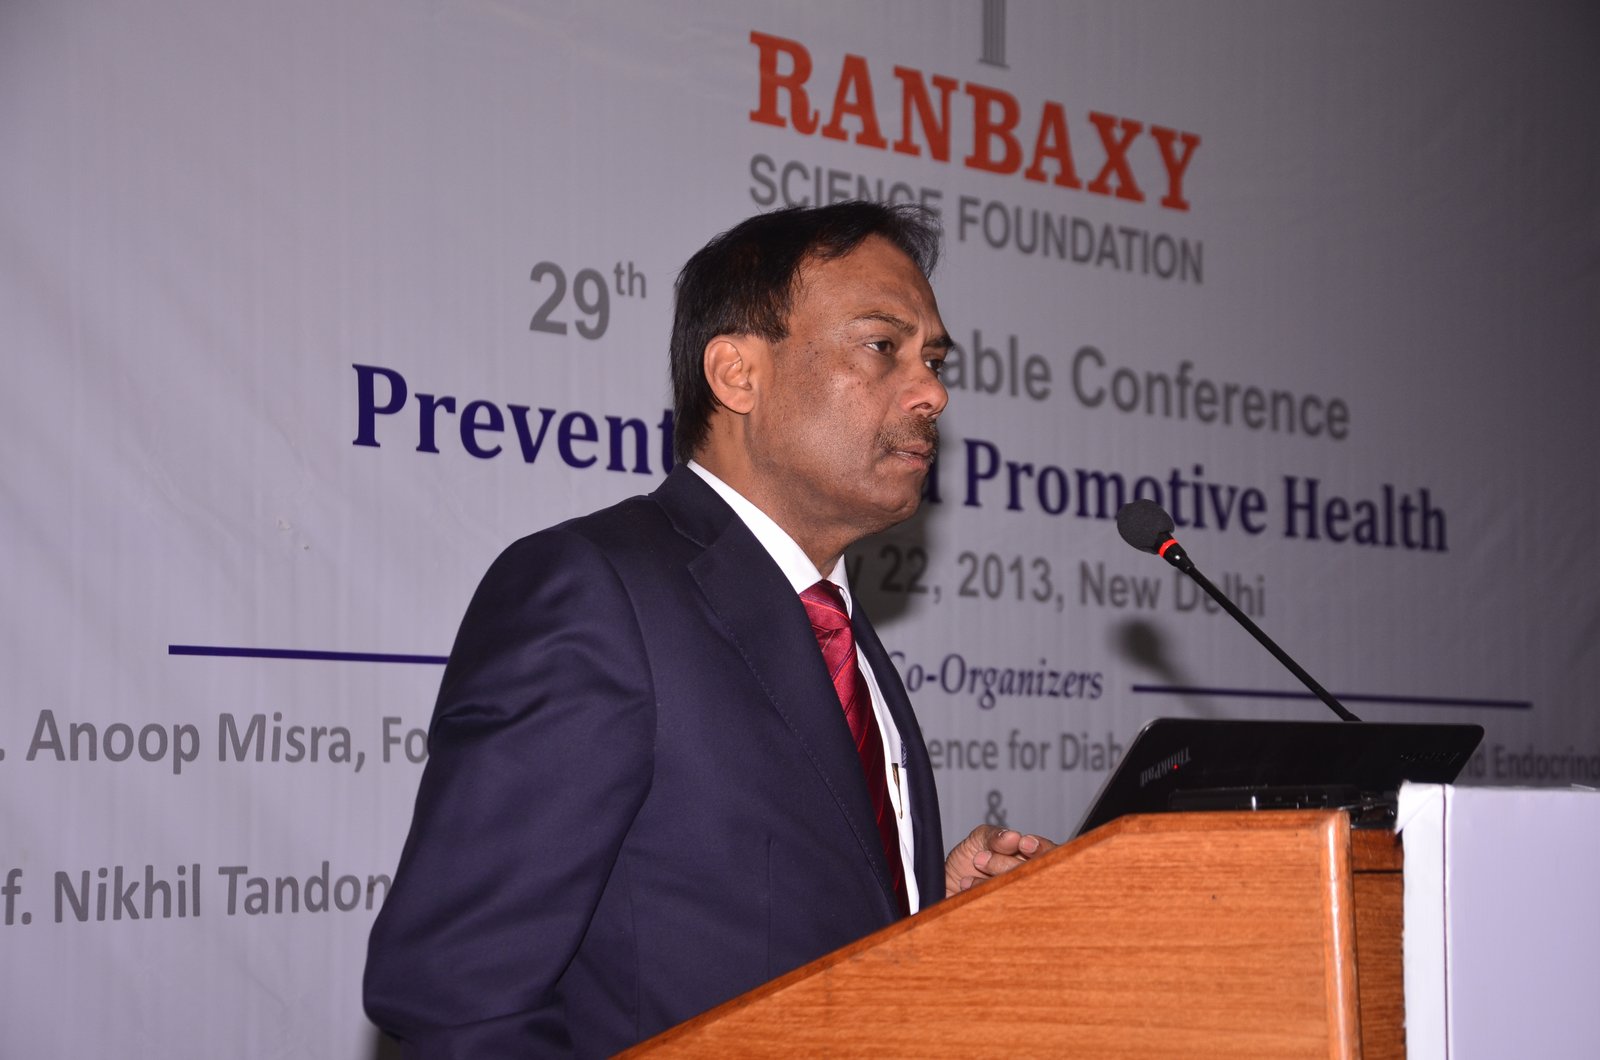 Dr Jagdish Prasad, director general-health services, ministry of health and family welfare, Government of India